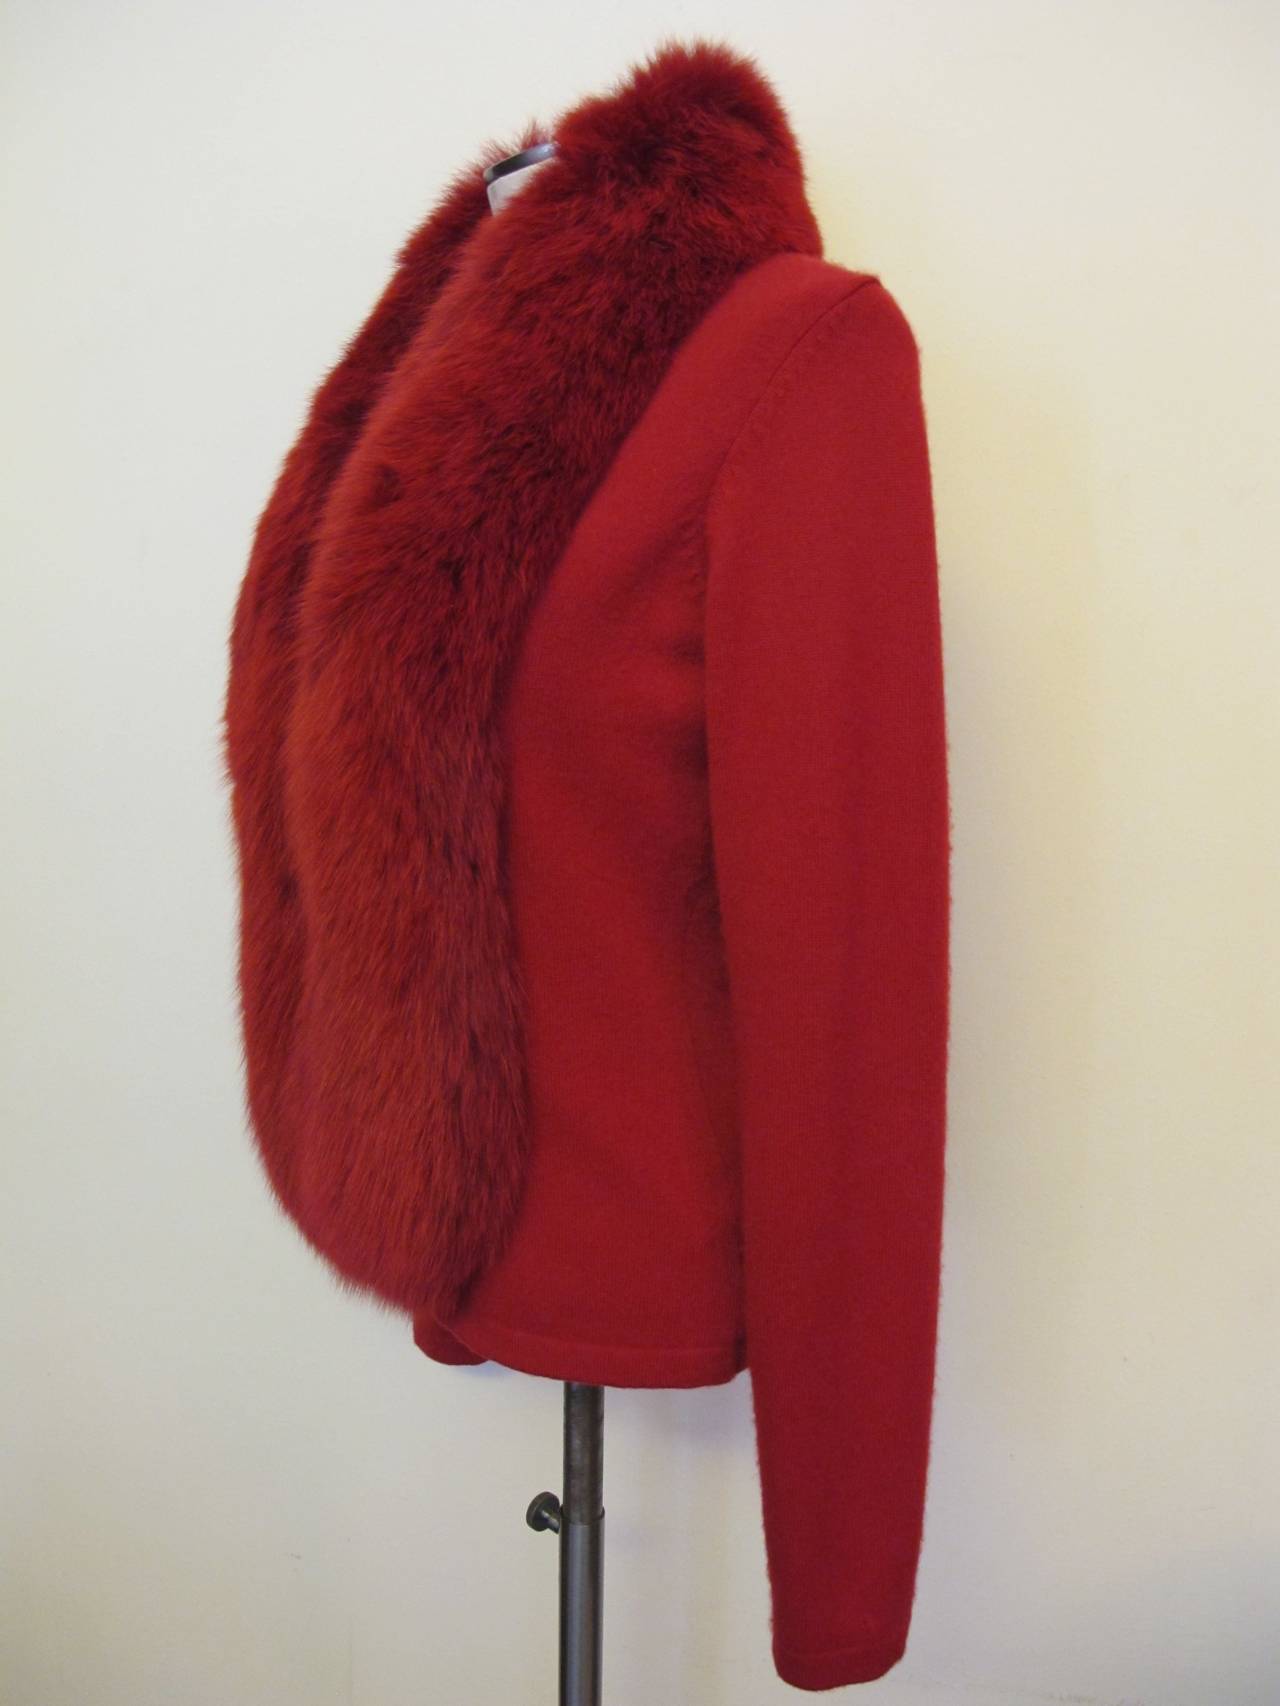 Chic, comfortable Randolph Duke Cashmere Sweater with 6 inch wide fox trim. The color of scarlet red with matching scarlet red fox trim accentuates the innate beauty and elegant style of this magnificent piece. It is perfect with jeans and as a